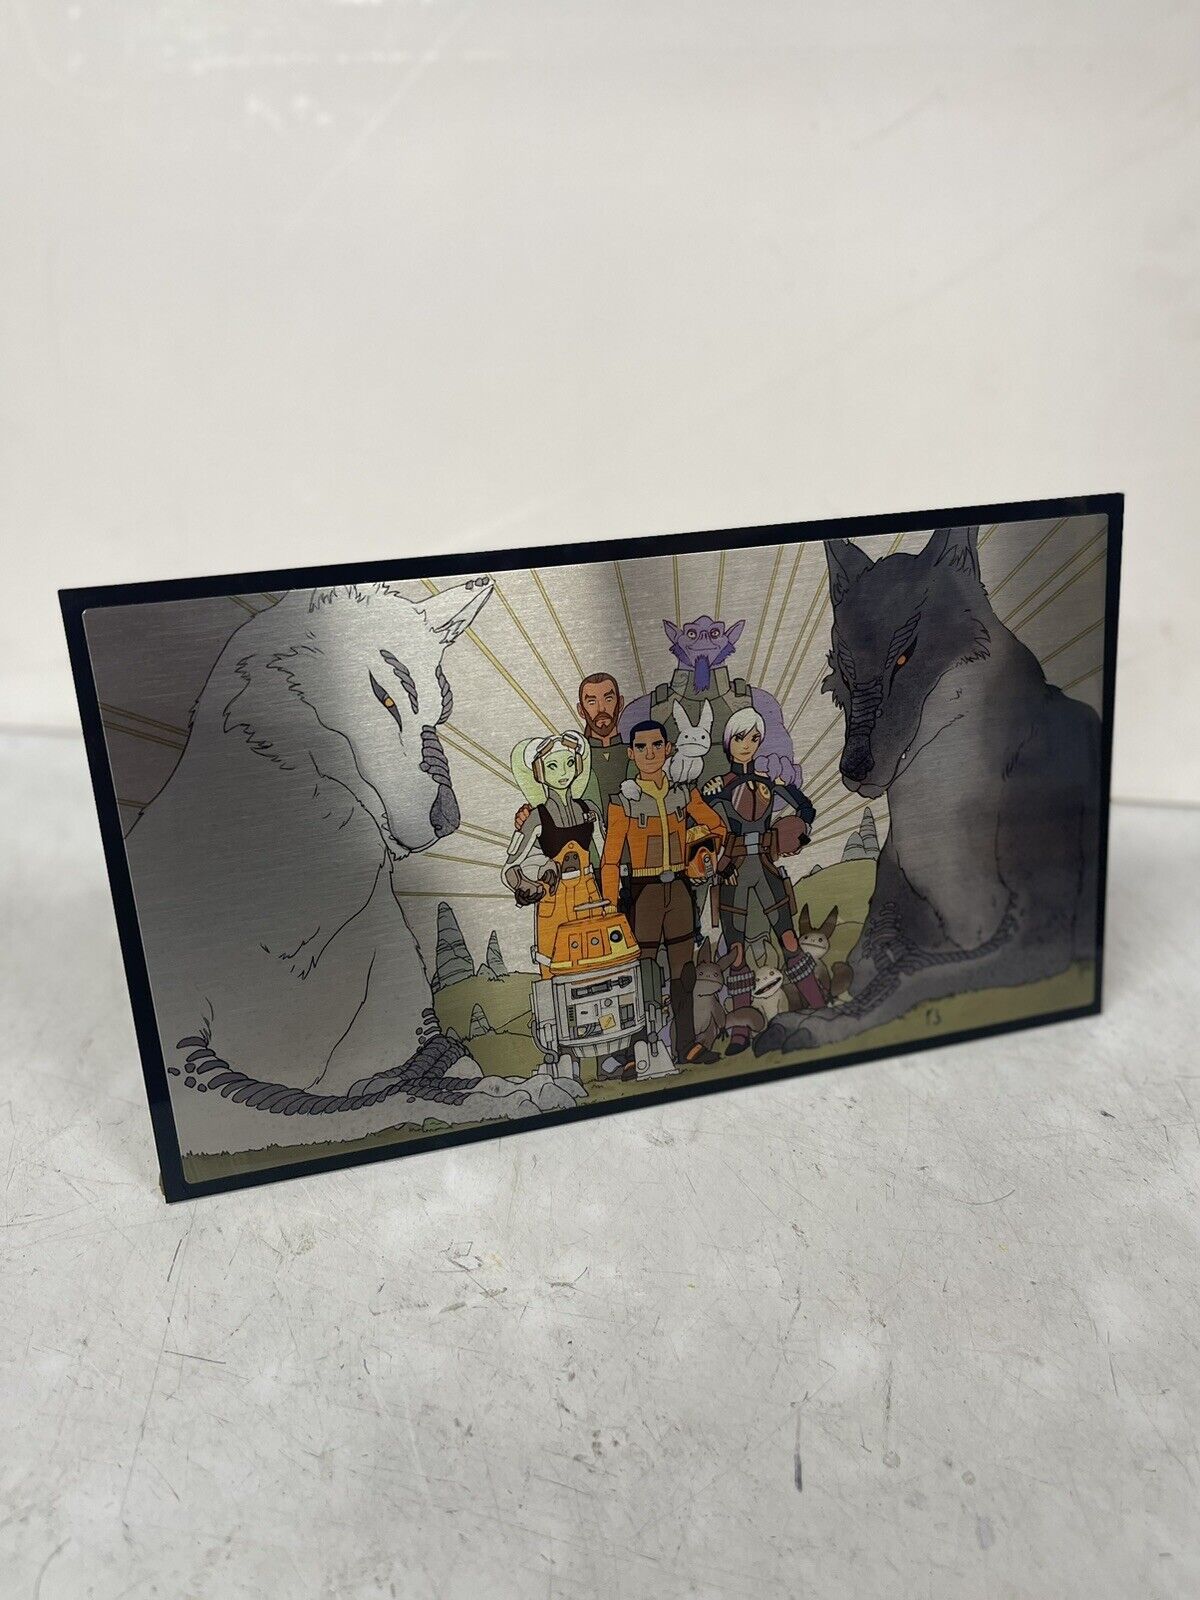 STAR WARS REBELS MURAL IMAGE METAL PLAQUE 10x5.5 INCHES WITH STAND